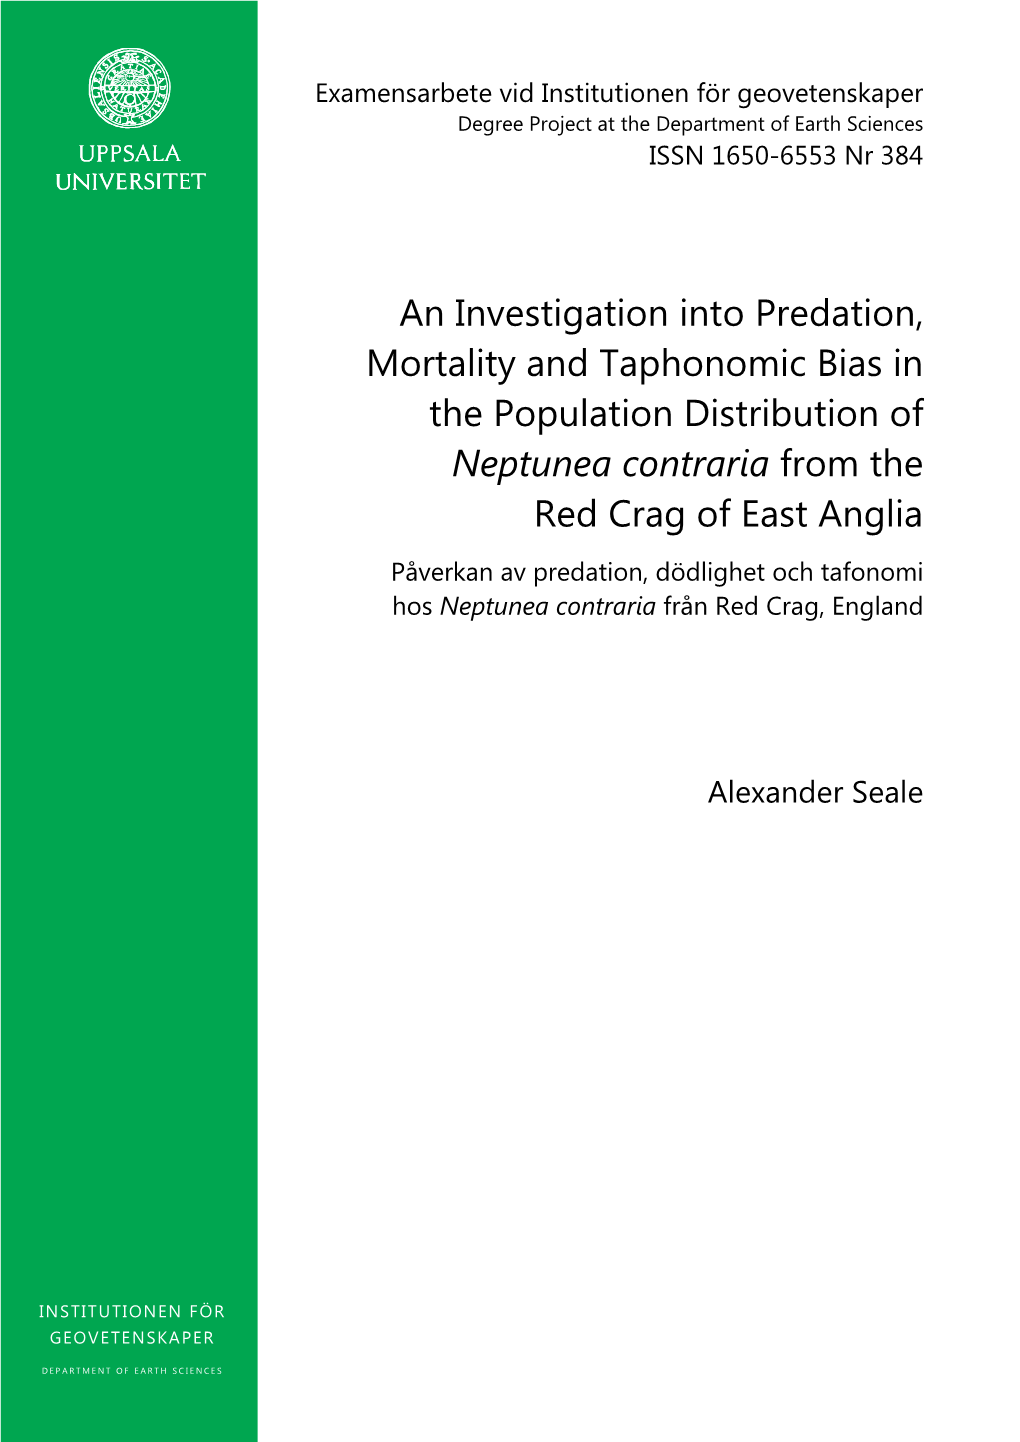 An Investigation Into Predation, Mortality and Taphonomic Bias In